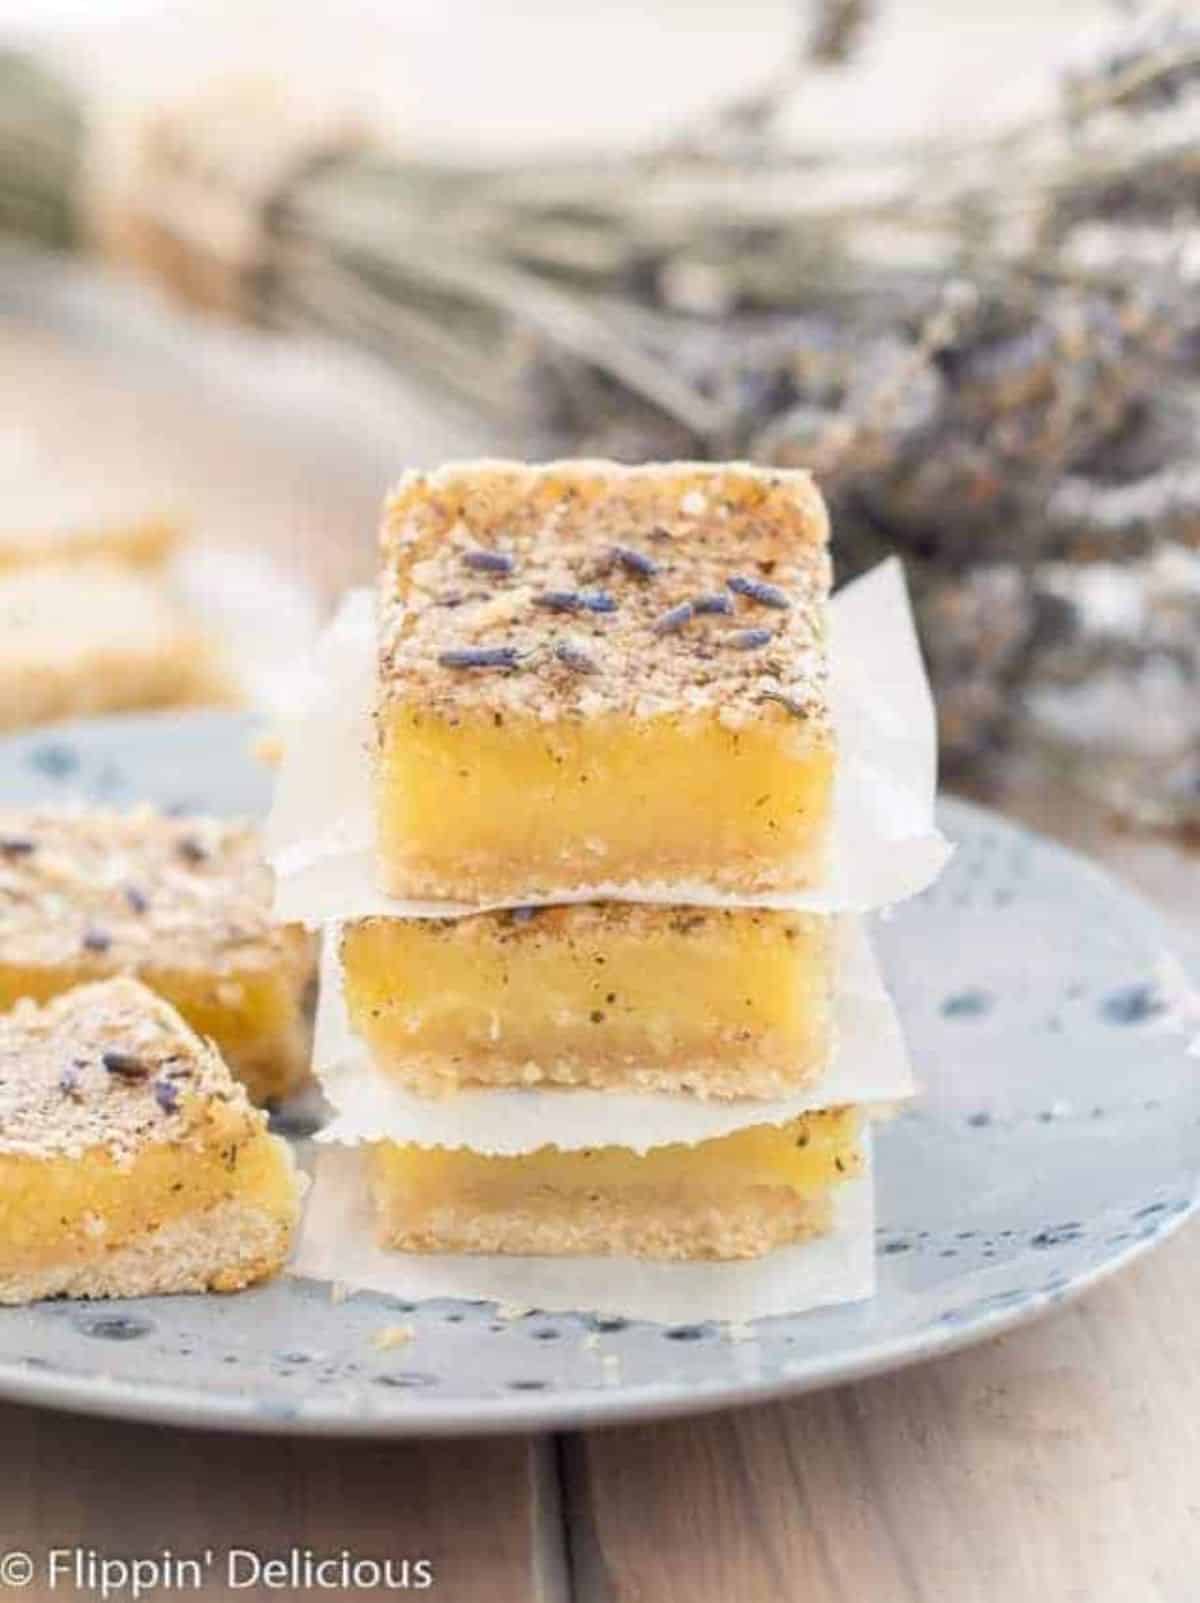 A pile of flavorful Gluten-Free Lavender Lemon Bars on a blue plate.